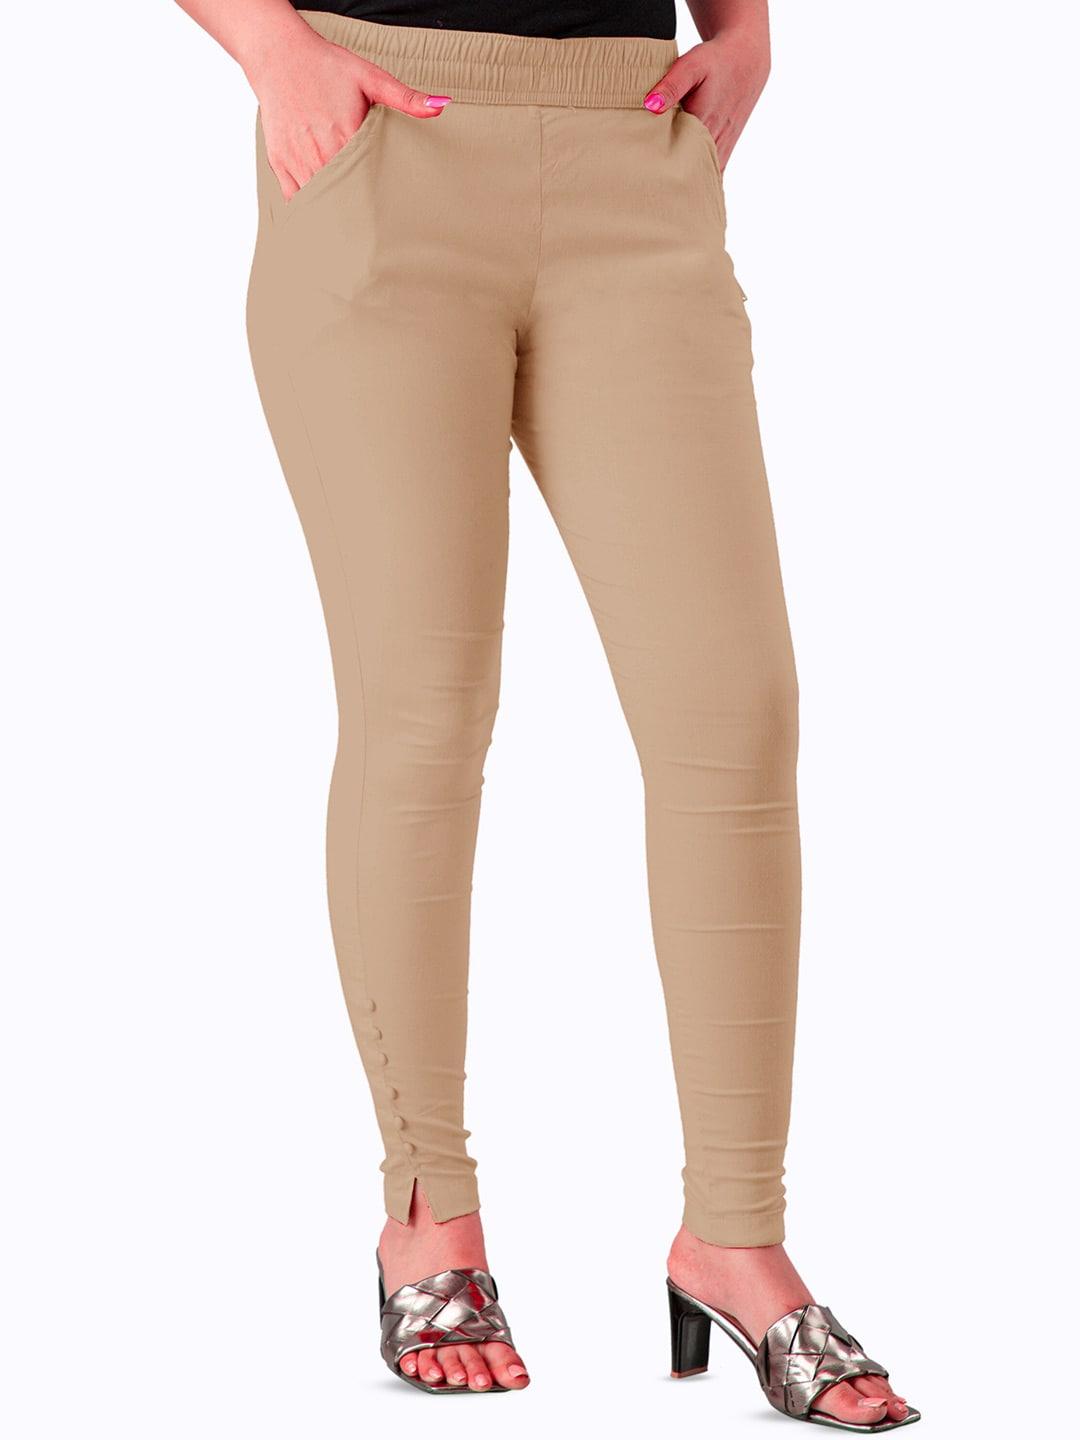 BAESD Stretchable Slim Fit Jeggings